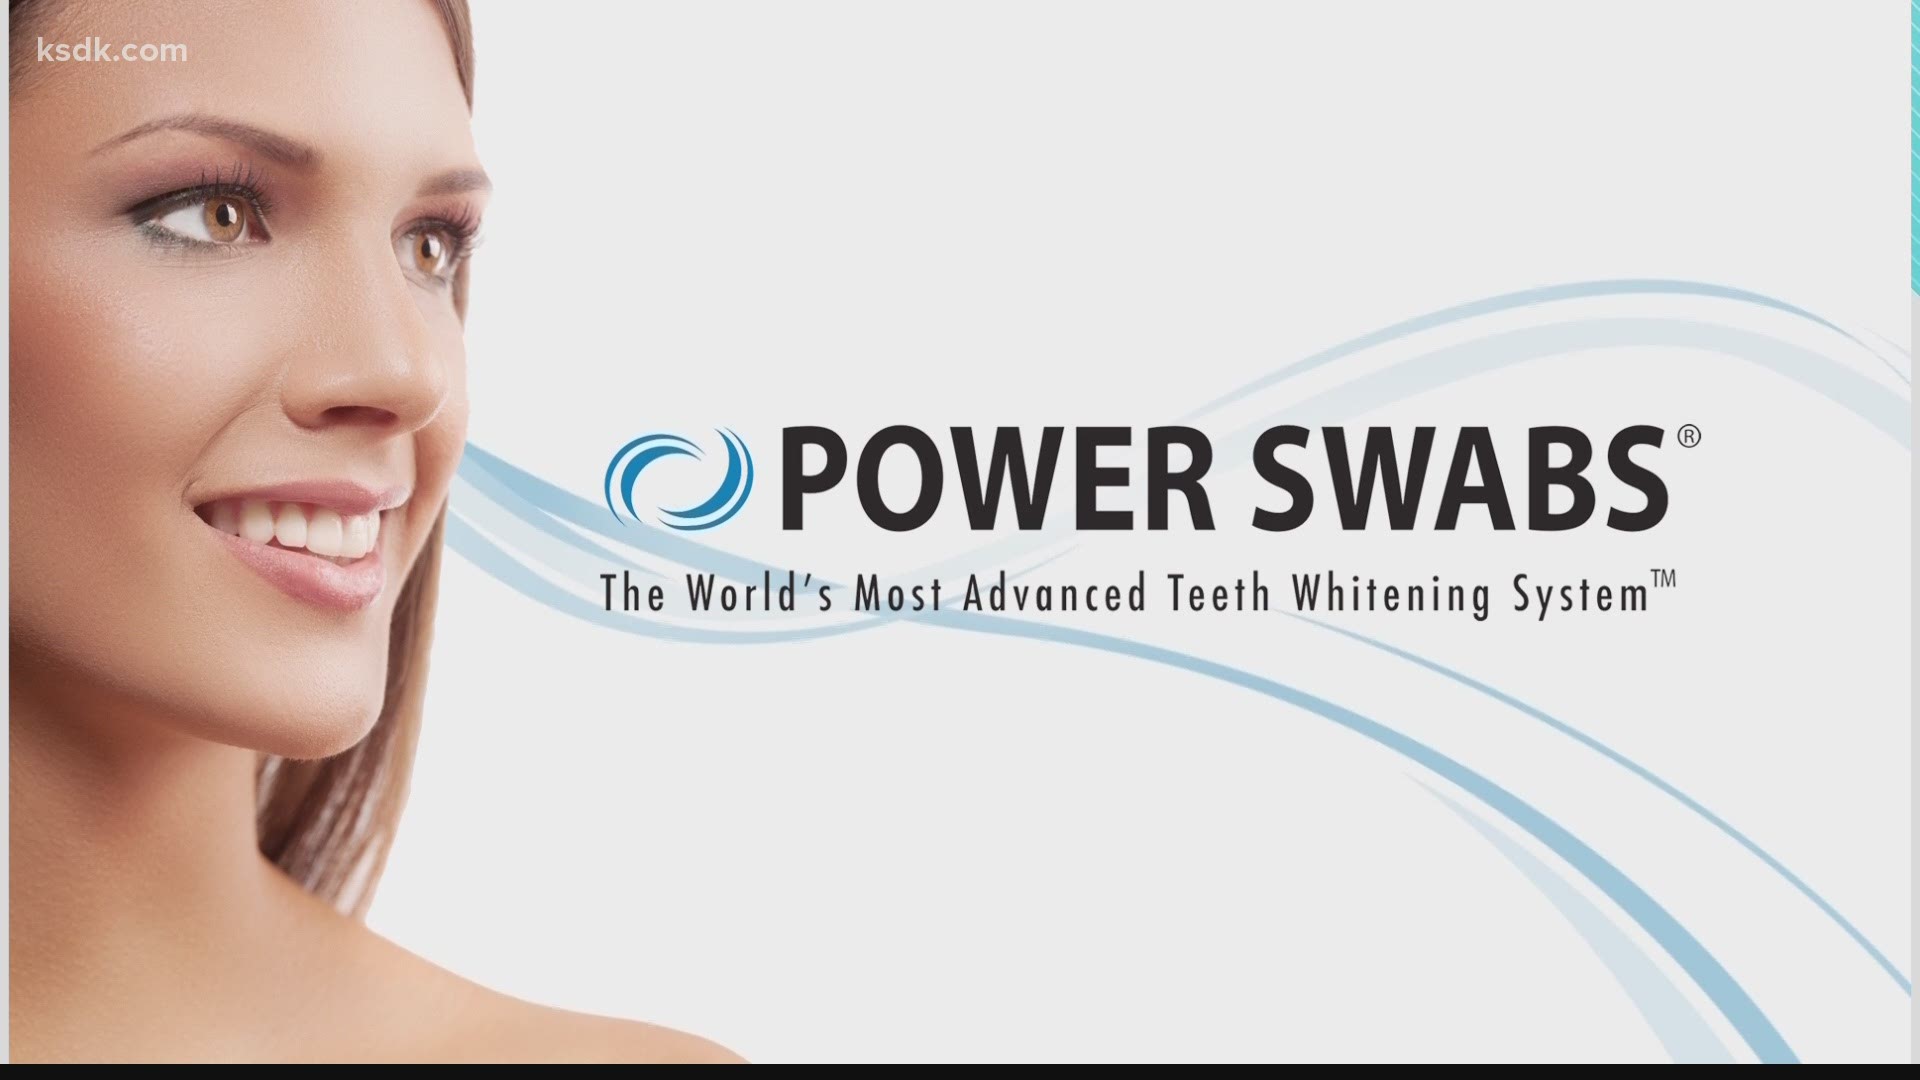 Melinda McKinsey with Power Swabs joined Show Me St. Louis to show how easy it is to get a whiter smile.